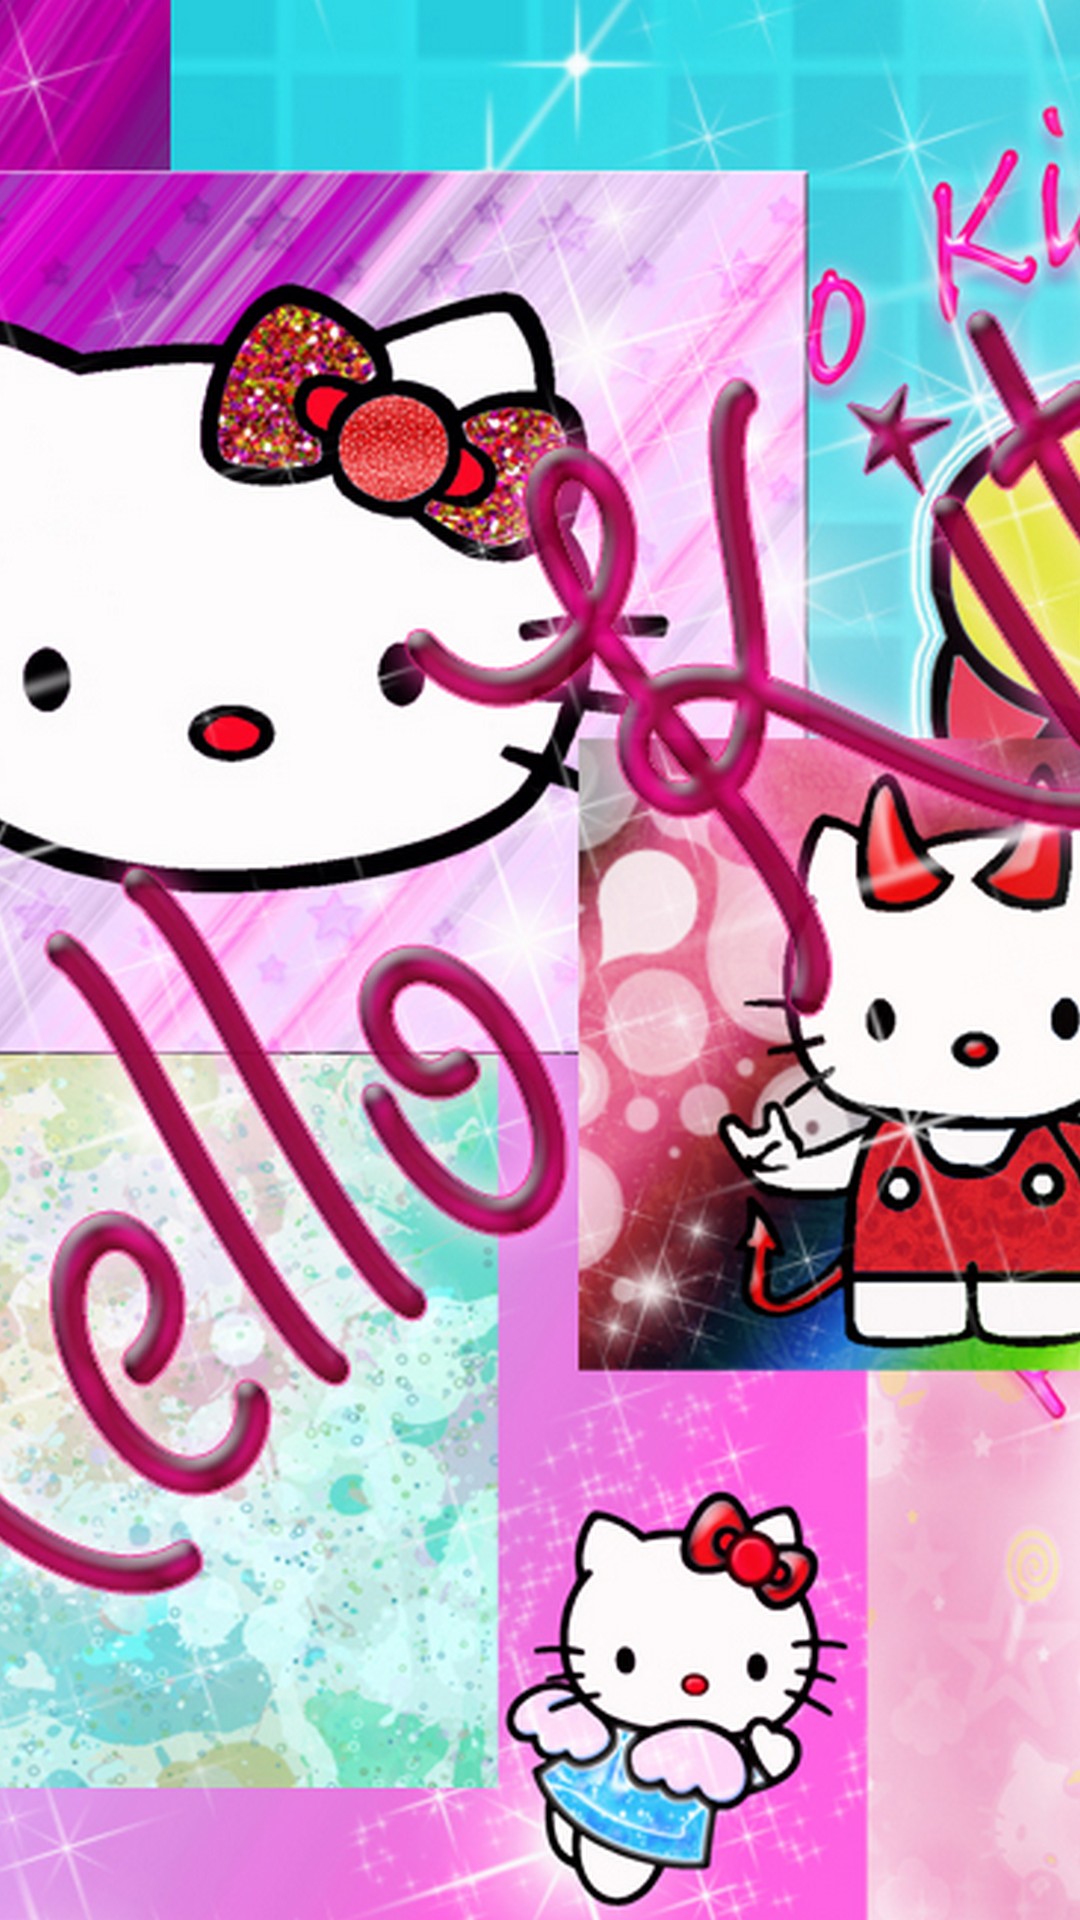 Wallpaper Android Sanrio Hello Kitty with resolution 1080X1920 pixel. You can make this wallpaper for your Android backgrounds, Tablet, Smartphones Screensavers and Mobile Phone Lock Screen